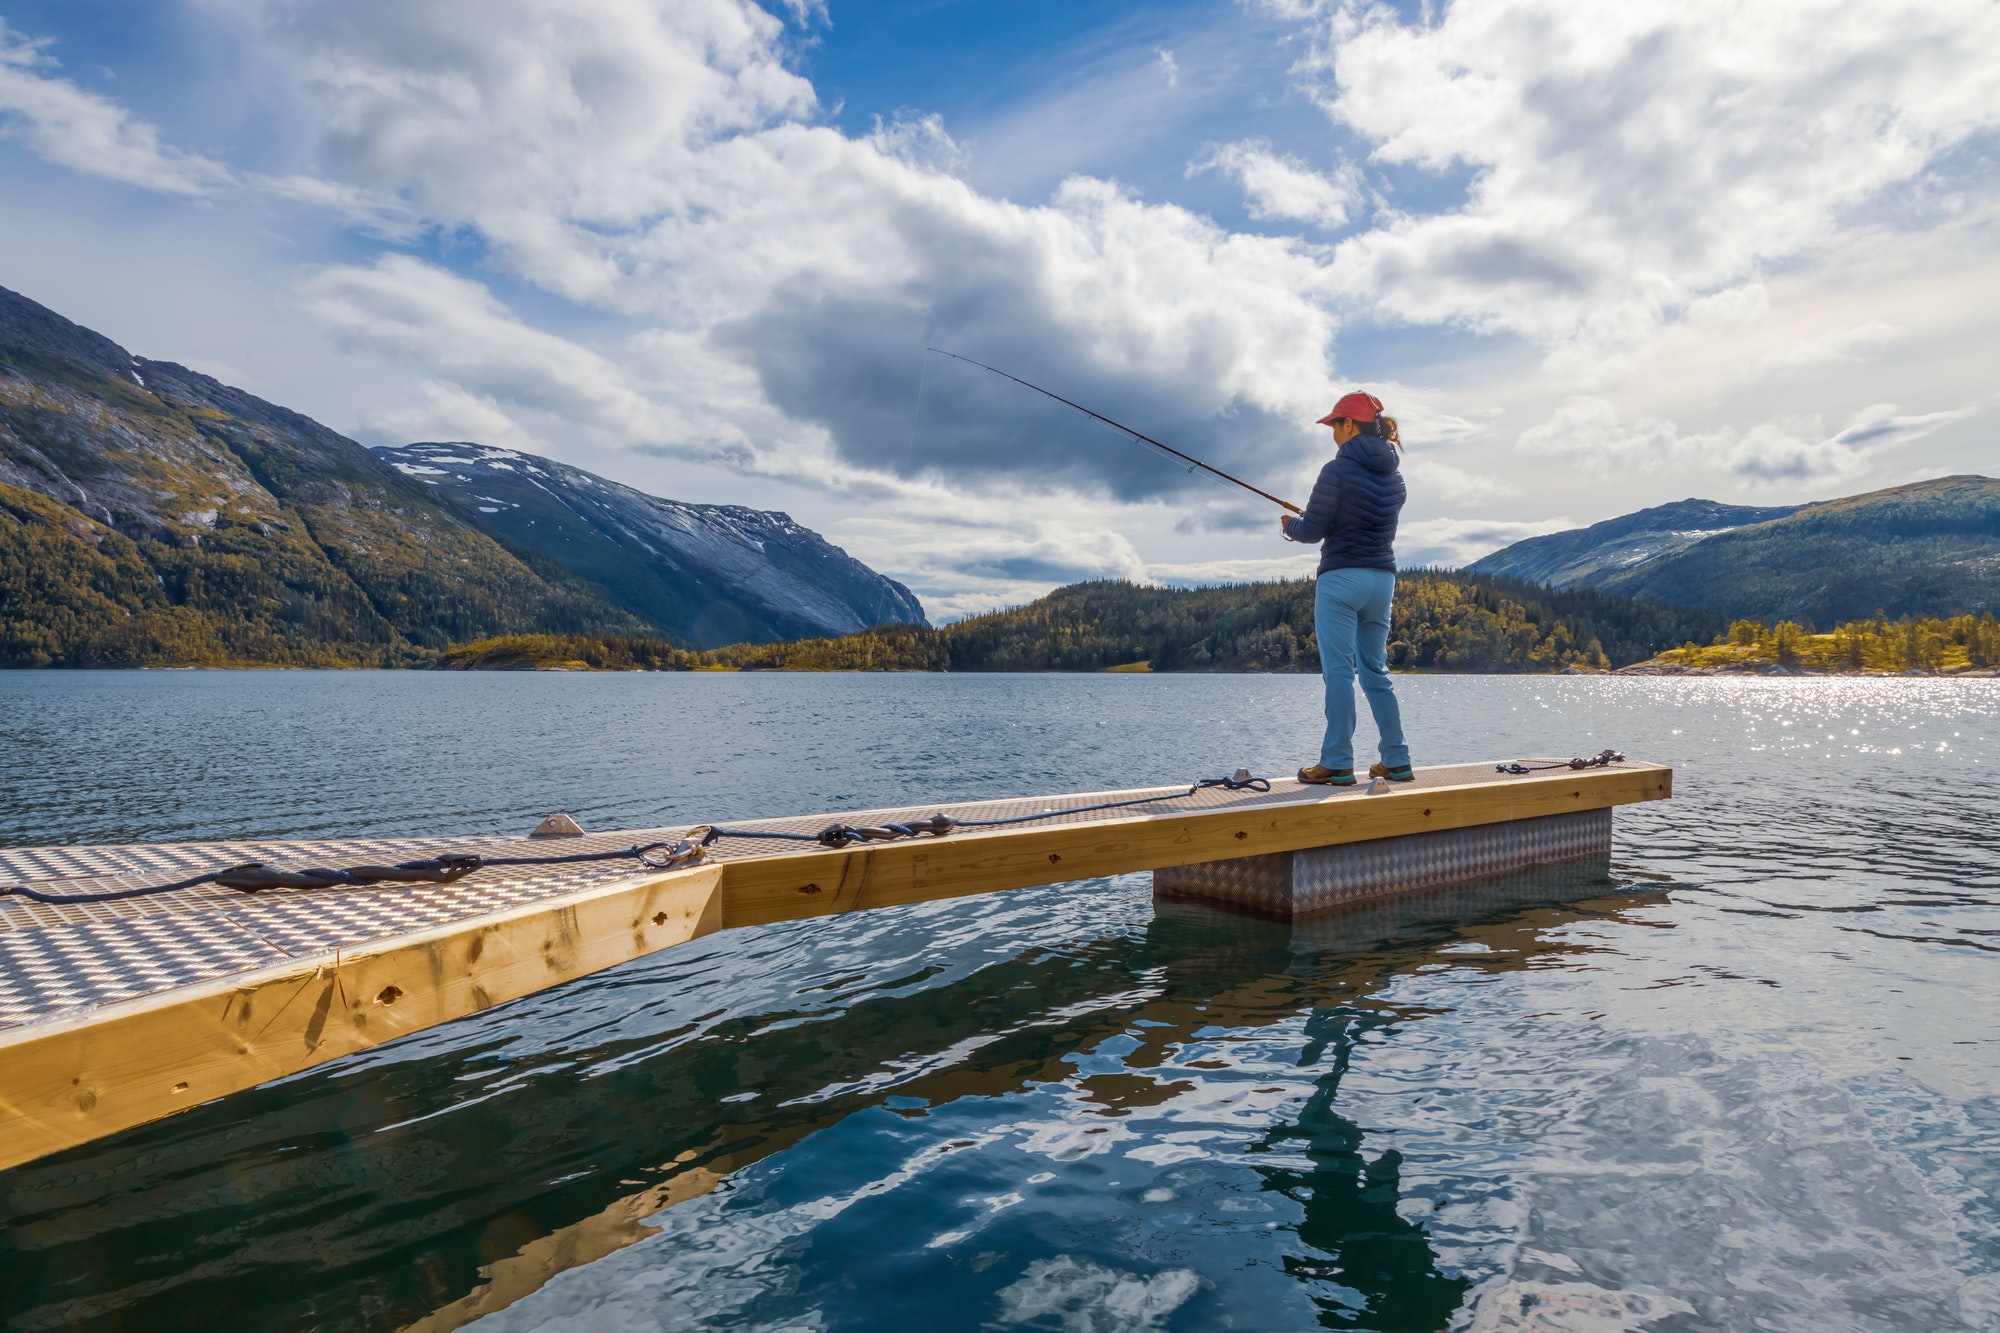 Woman fishing on Fishing rod spinning in Norway.